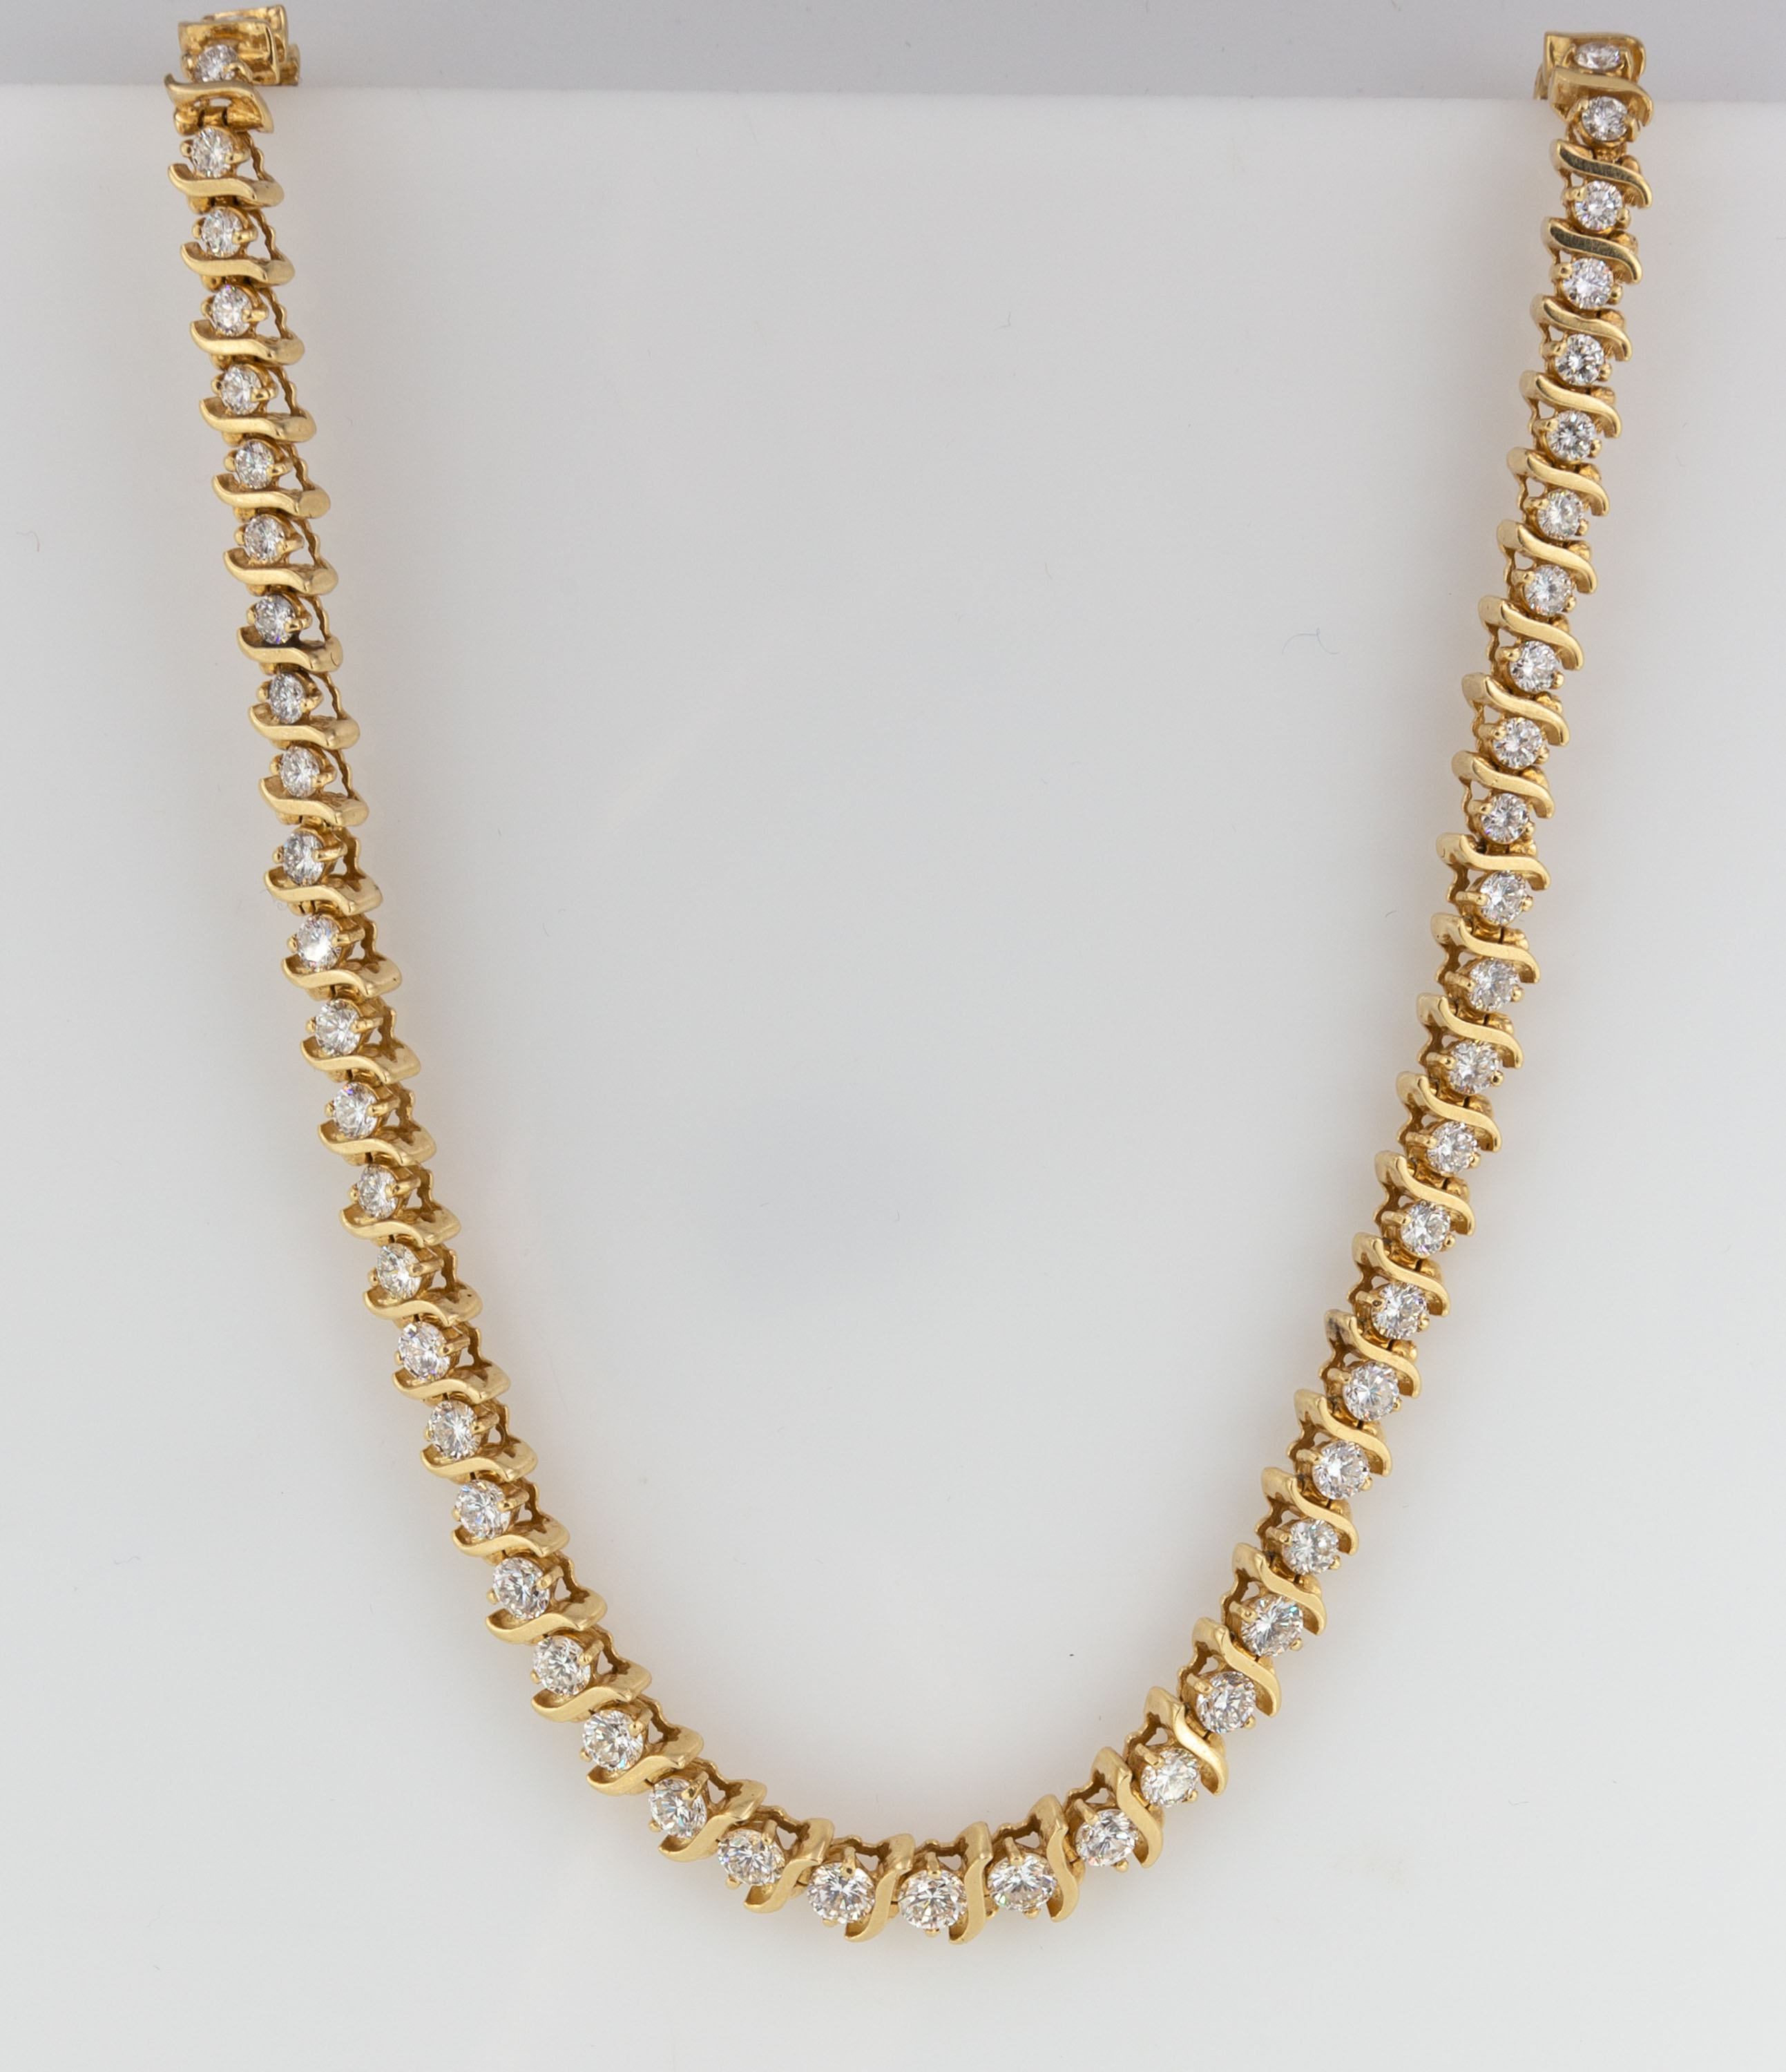 14K GOLD AND DIAMOND NECKLACE WITH 28d479